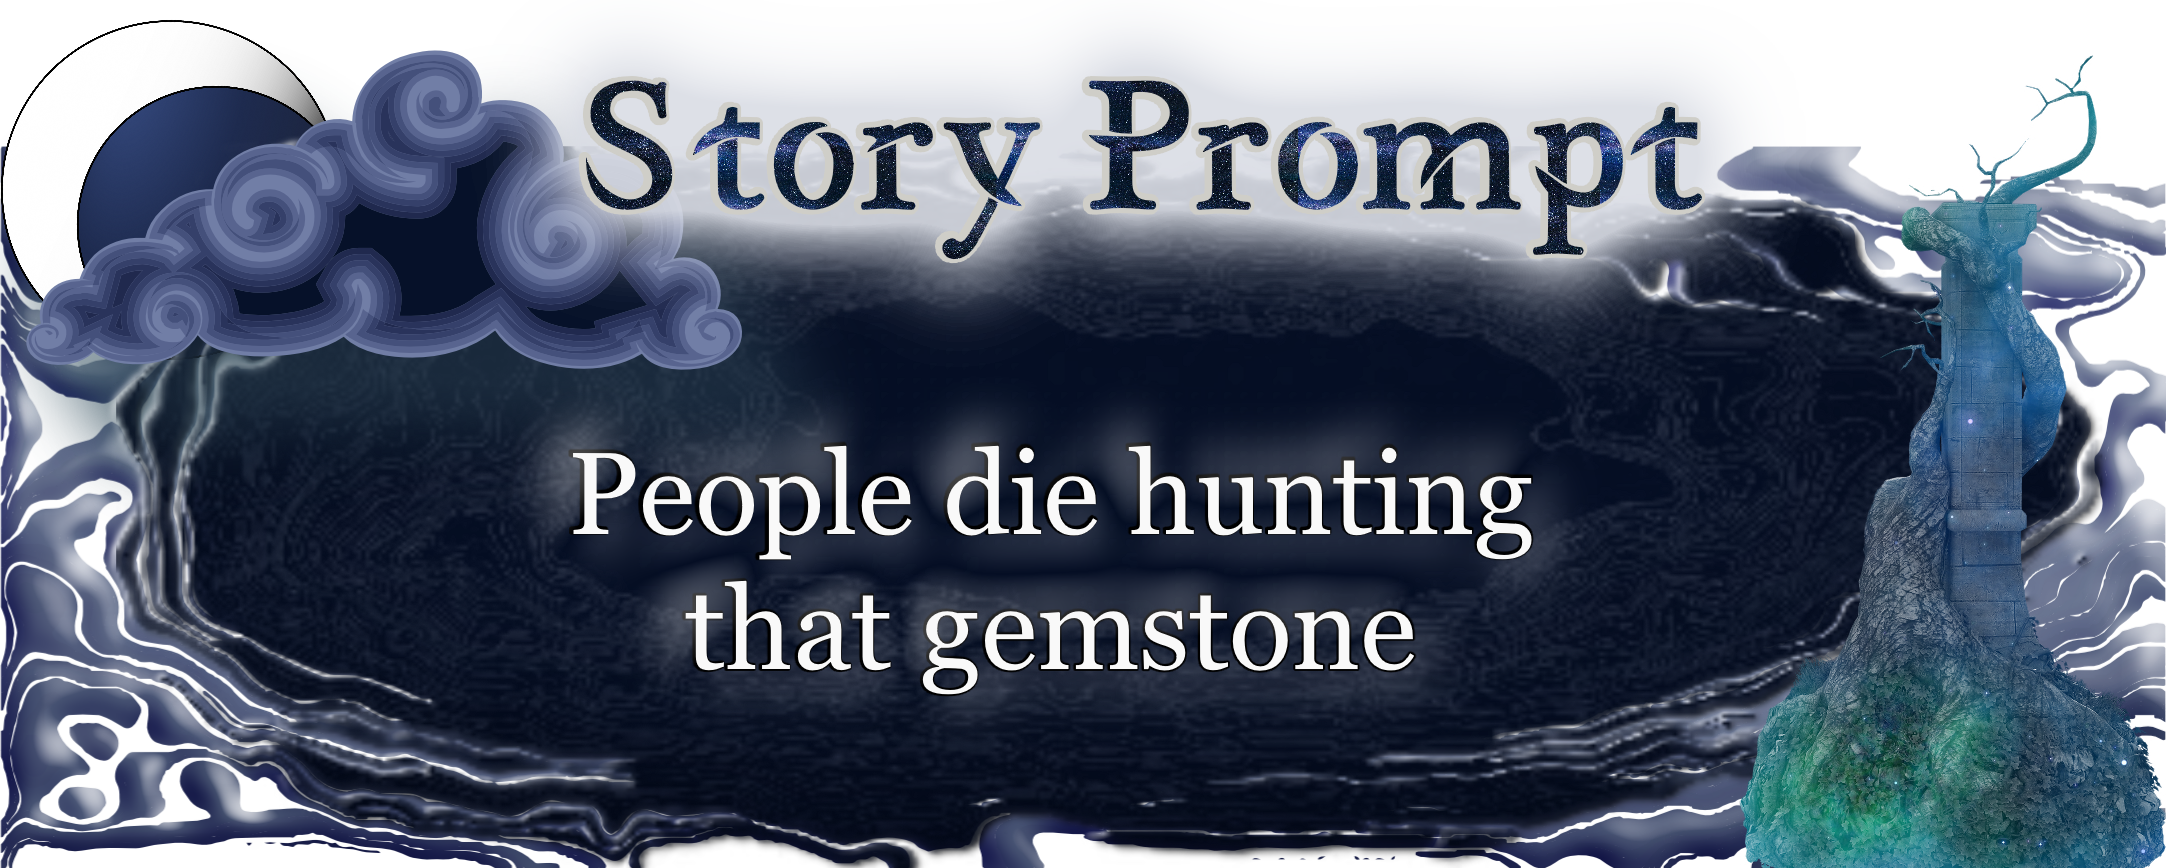 Author Jenna Eatough's Flash Fiction Story from writing prompt: People die hunting that gemstone